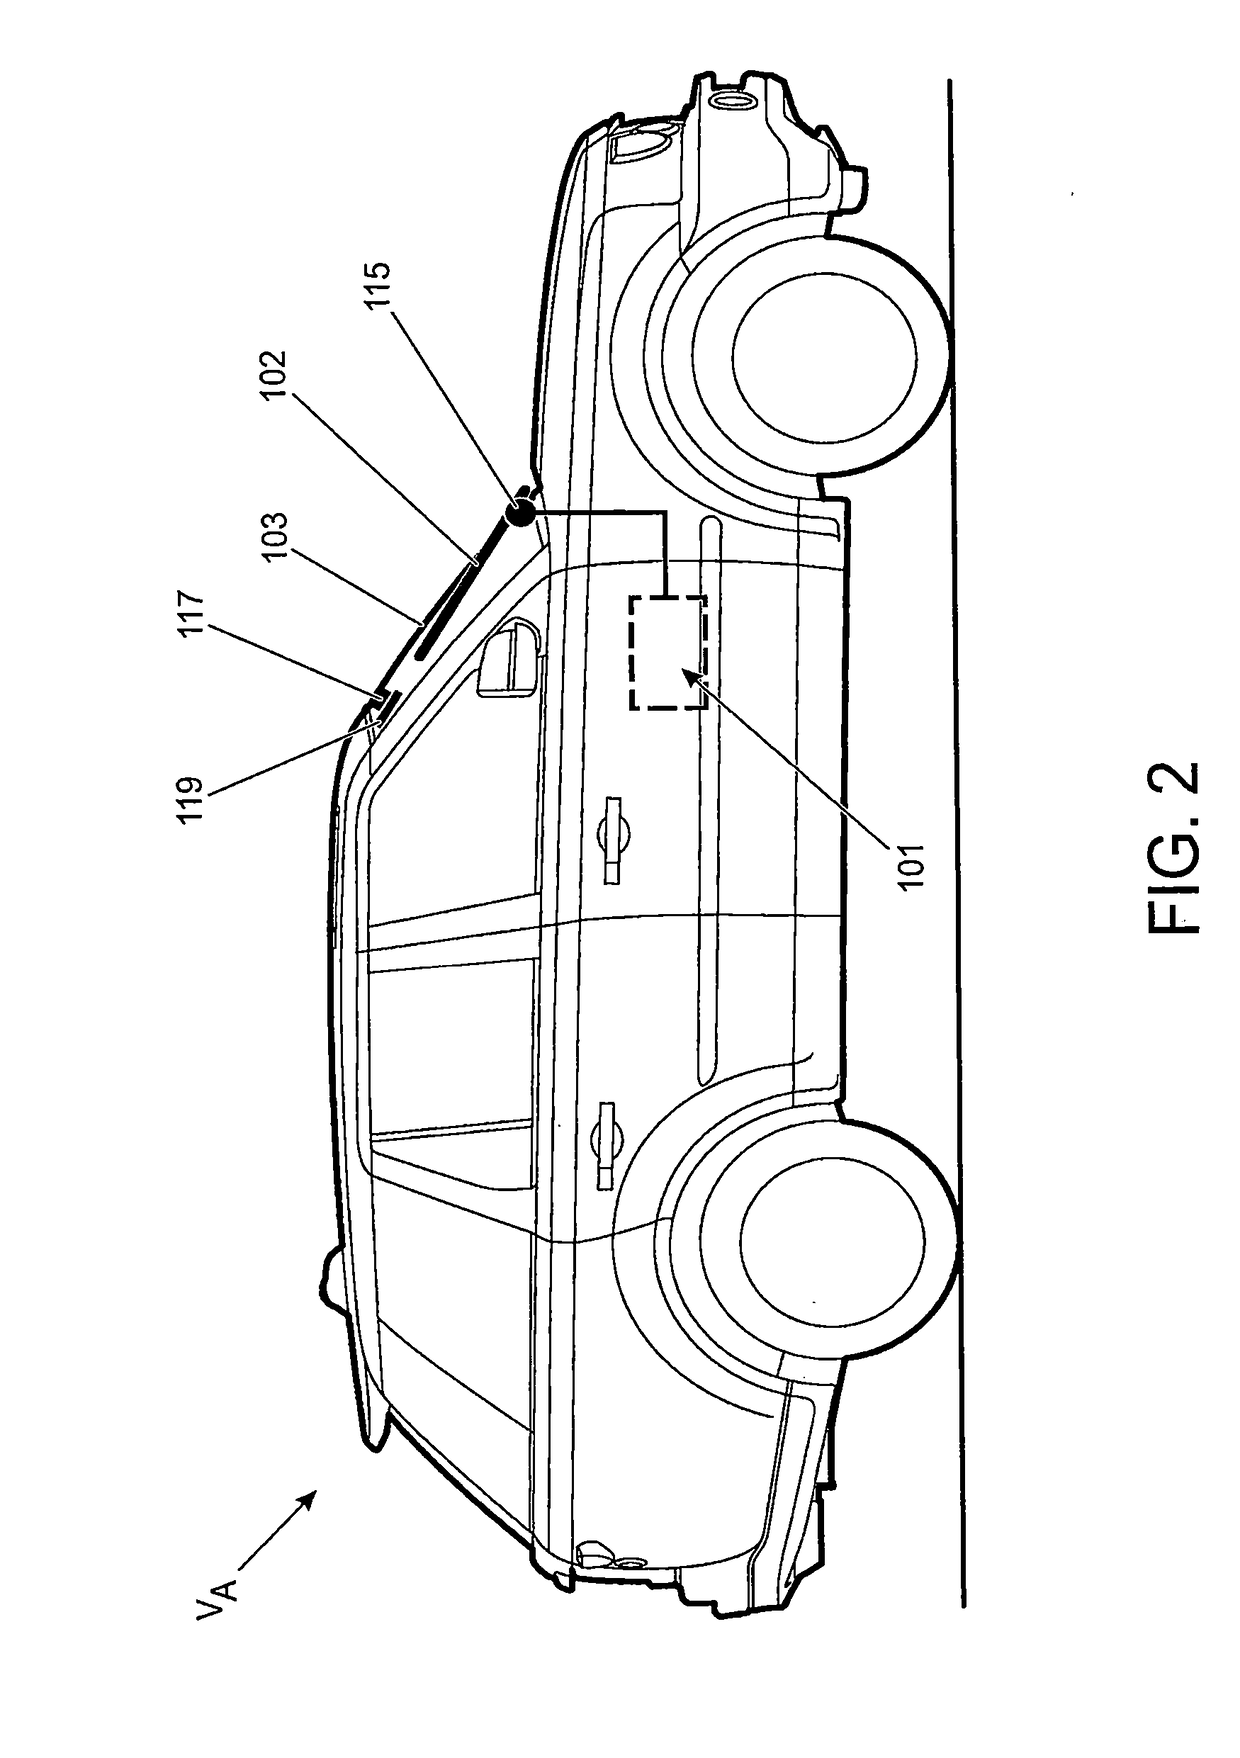 Apparatus and method for controlling a vehicle system